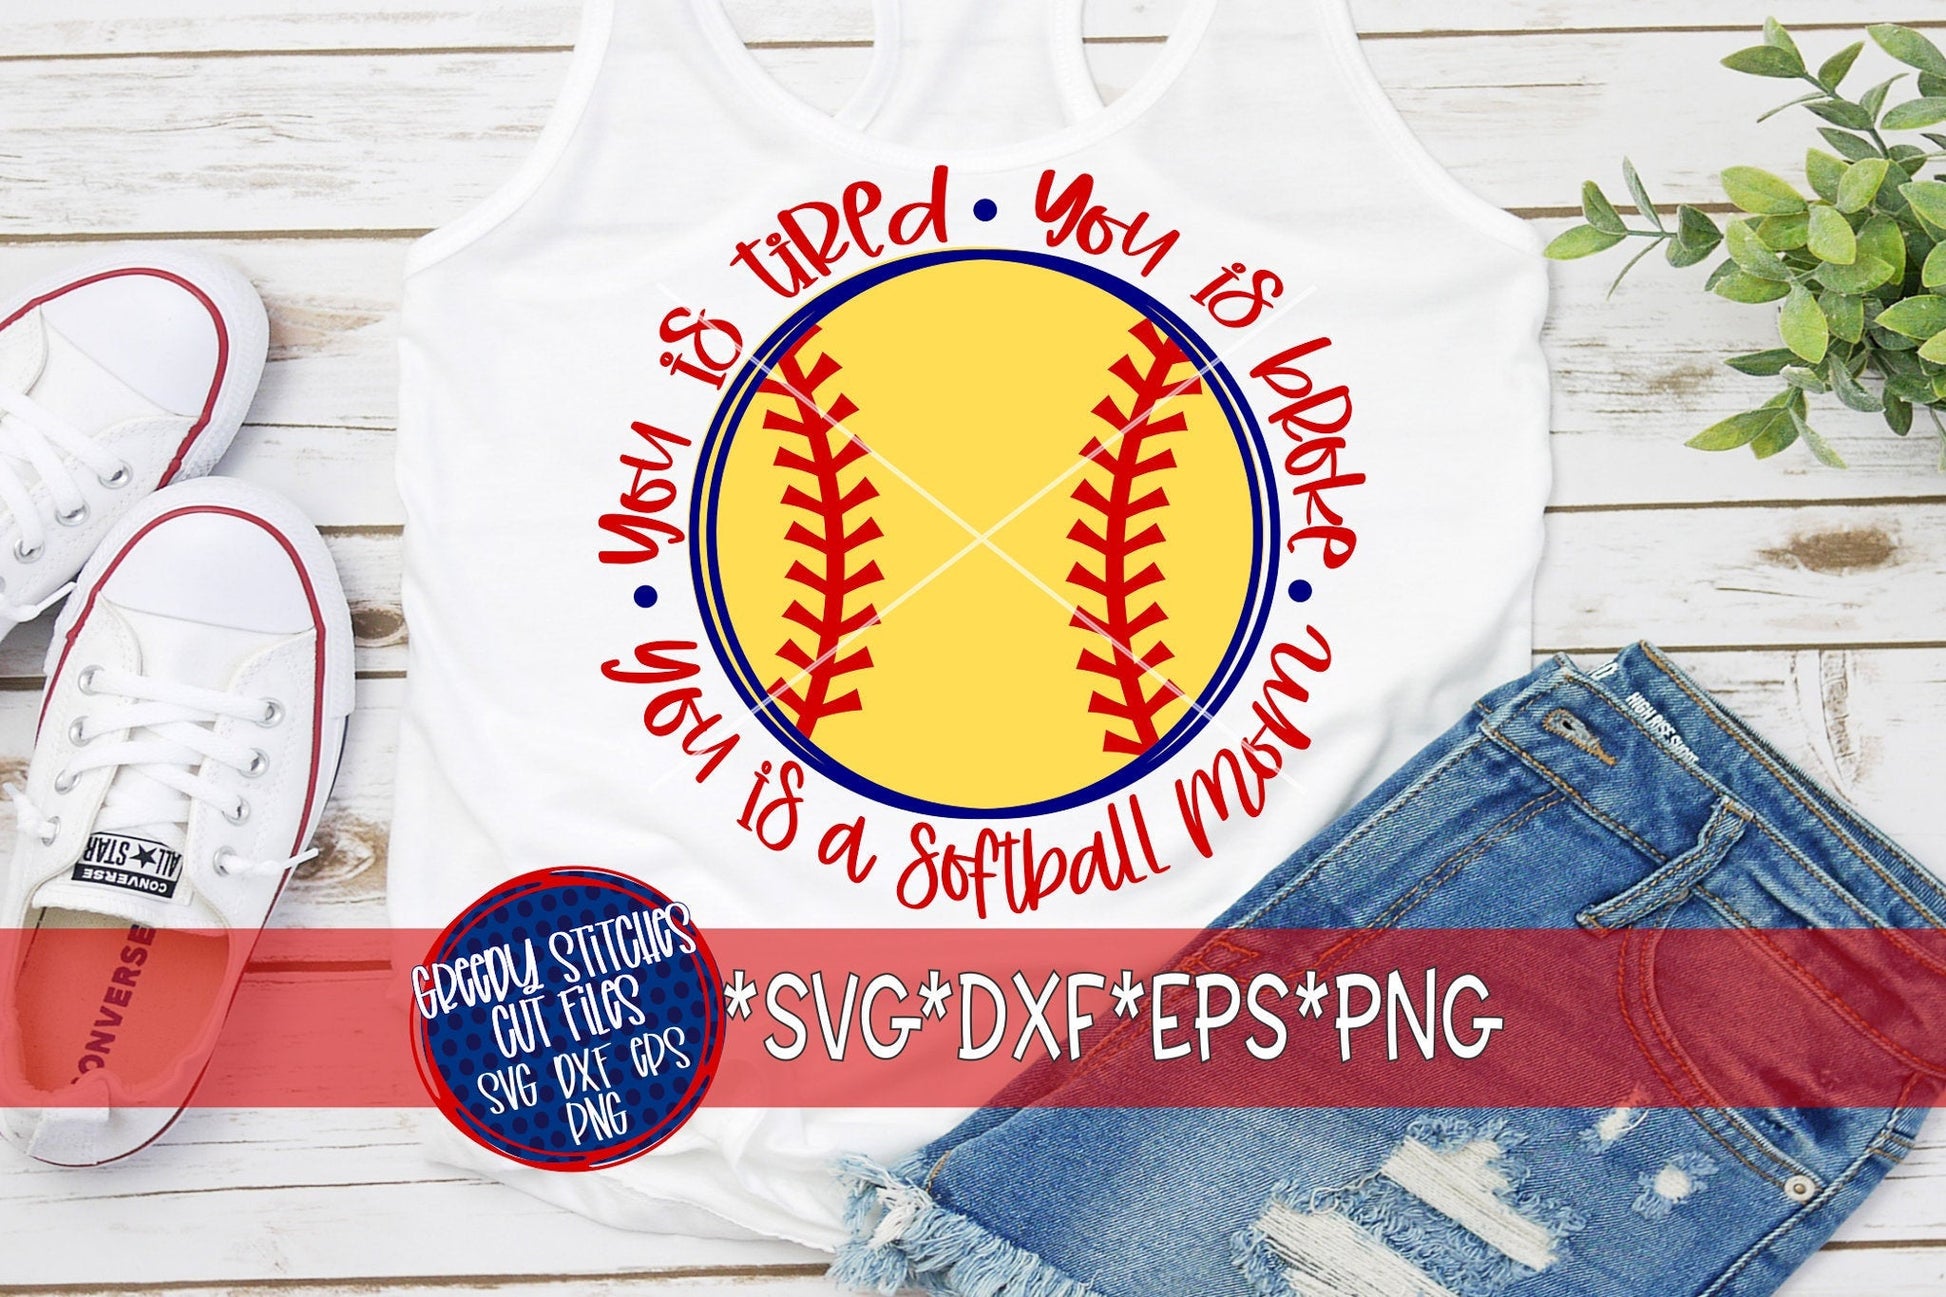 You Is Tired You Is Broke You Is A Softball Mom svg eps dxf png. Softball SvG | Softball SvG | Softball Mom SvG | Instant Download Cut Files